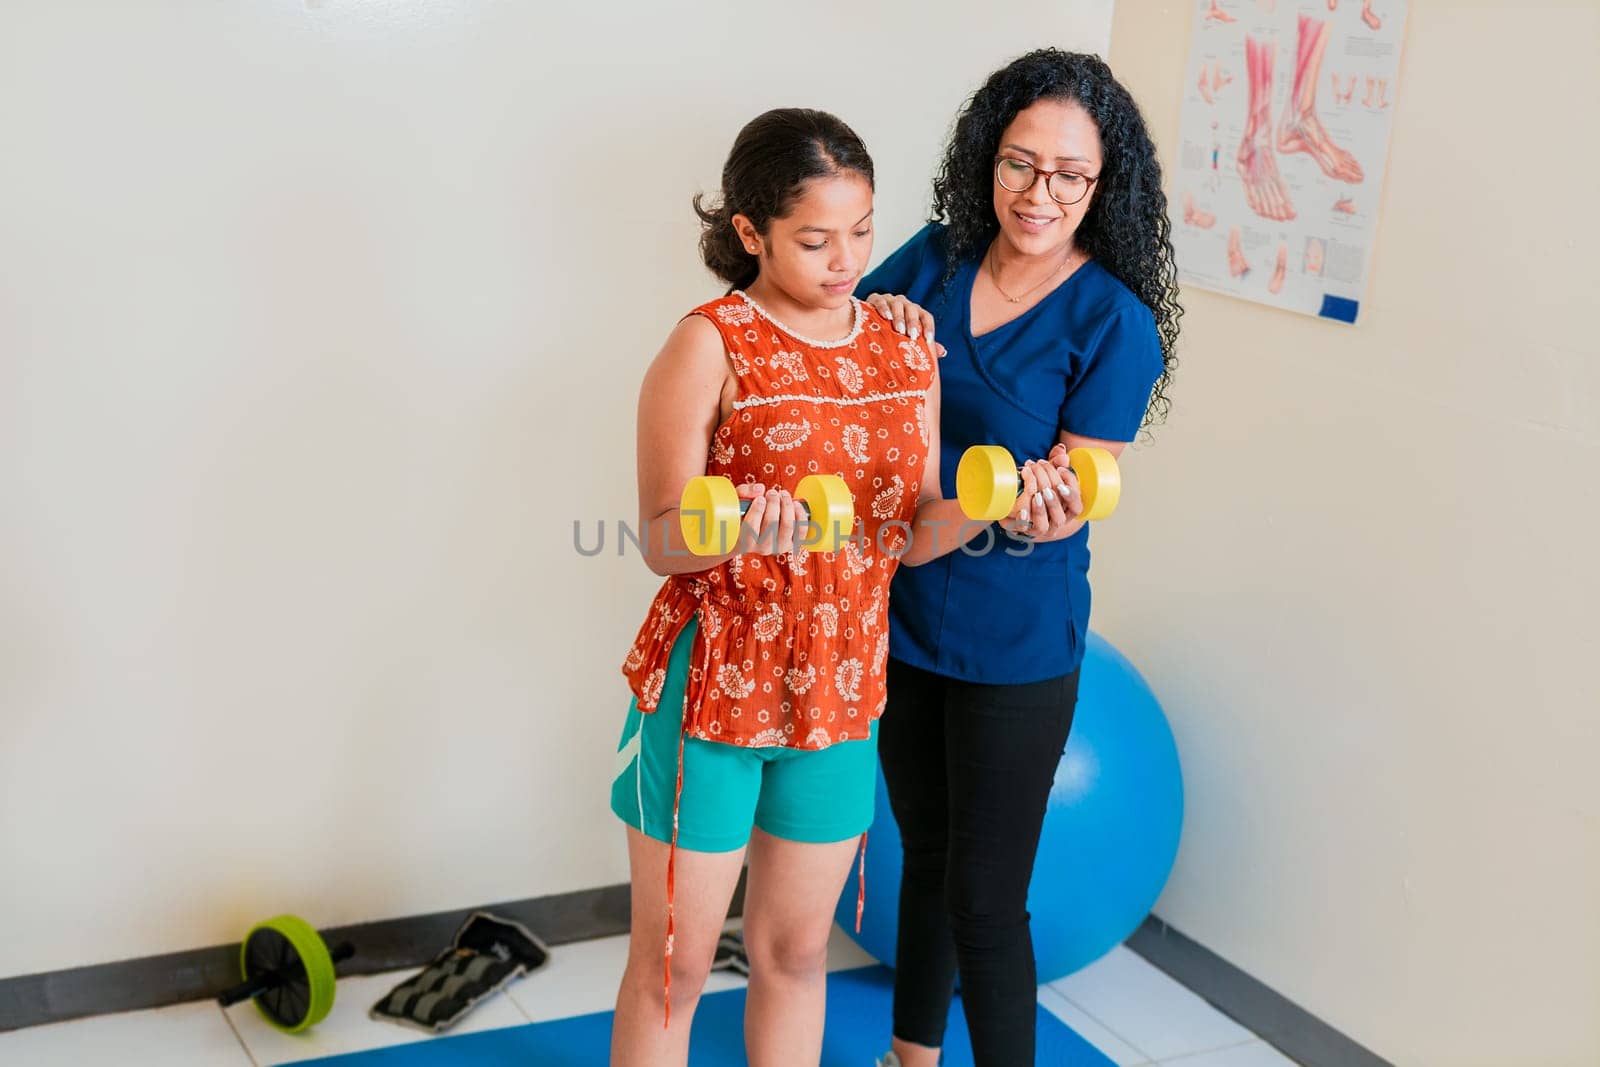 Physiotherapist assisting female patient with dumbbells on rehab ball. Rehabilitation physiotherapy with dumbbells by isaiphoto